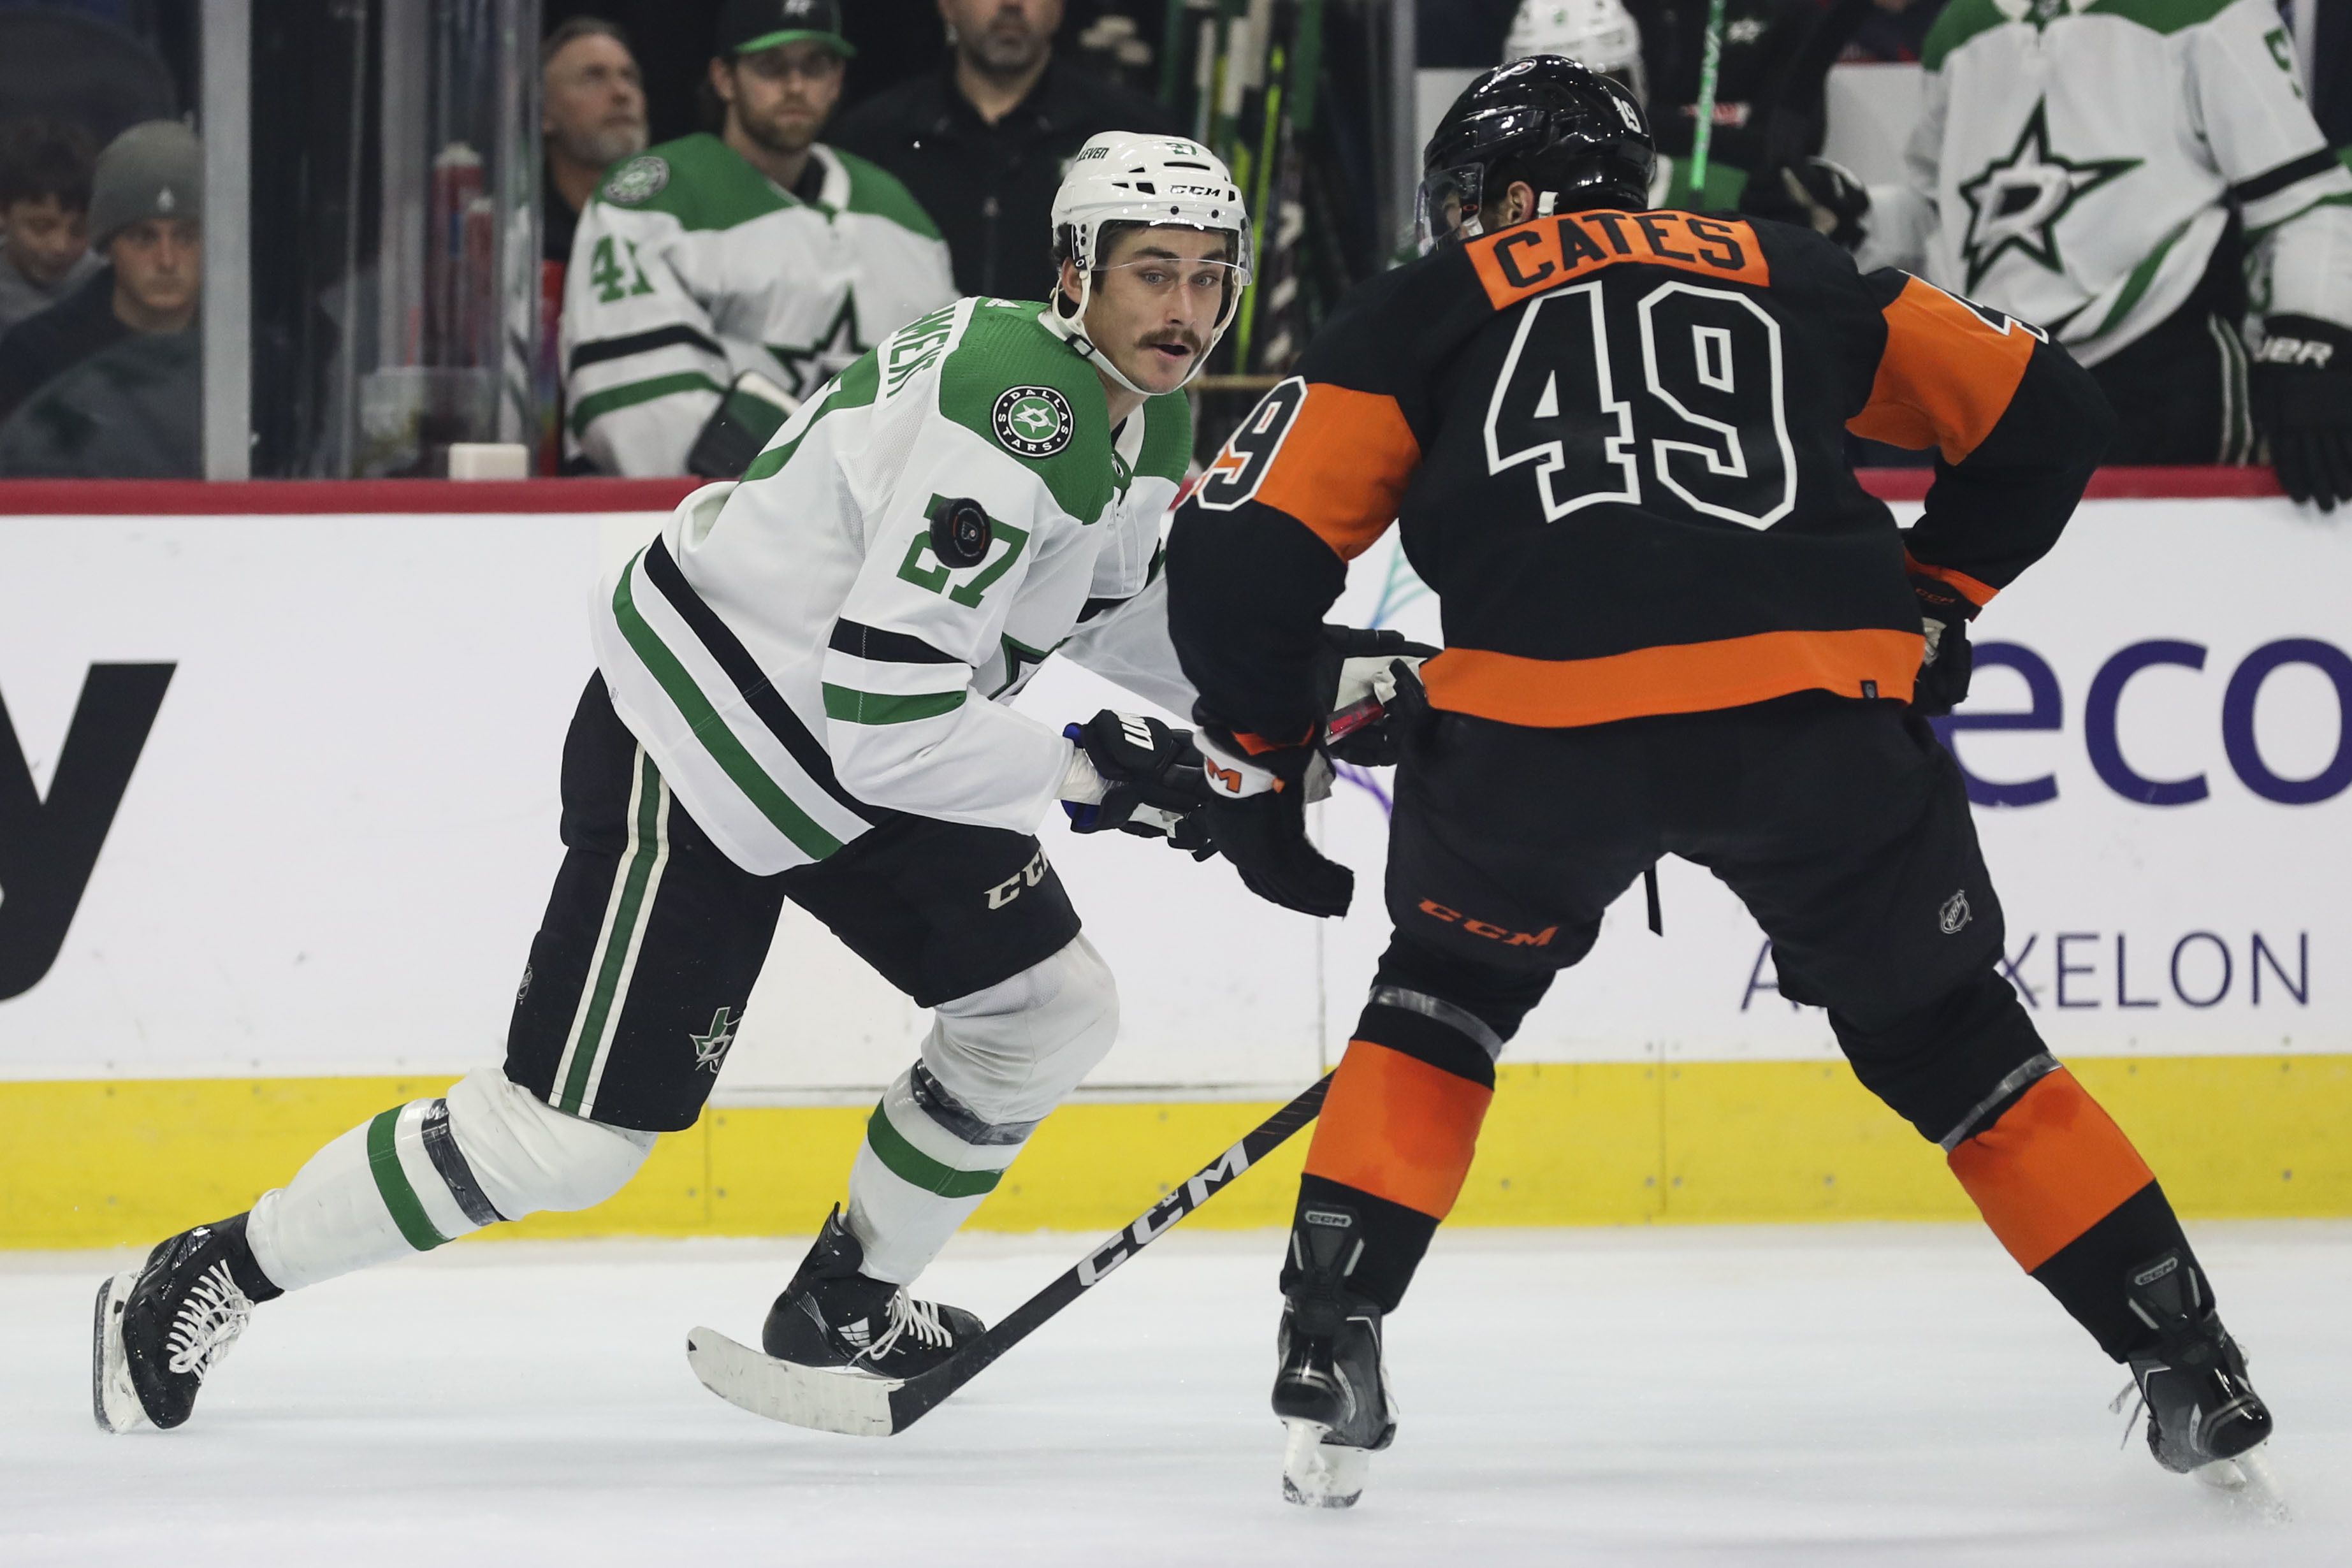 Pavelski Comes up Clutch, Stars Down Flyers 5-4 in OT